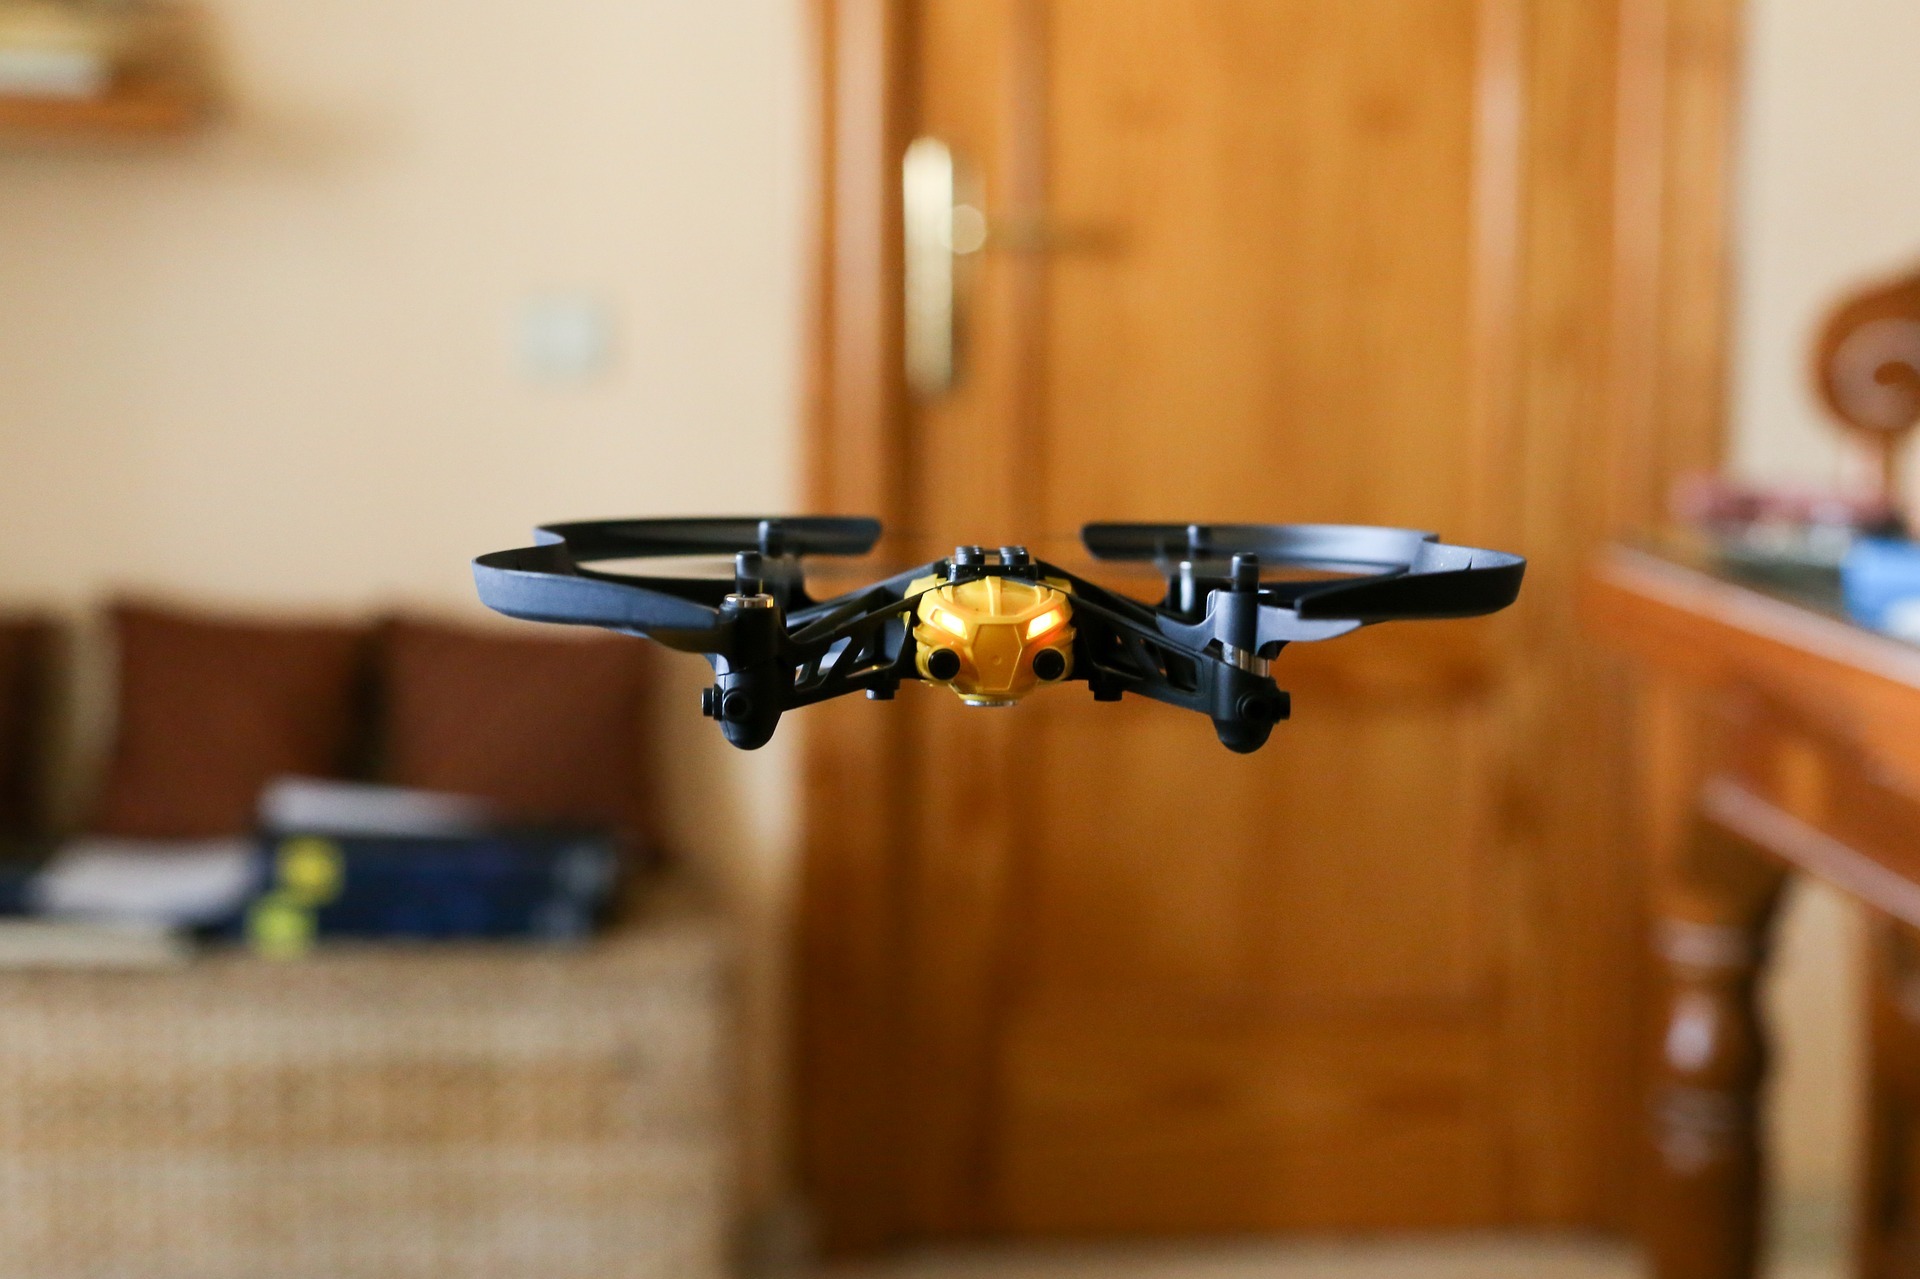 a small drone flying inside the house